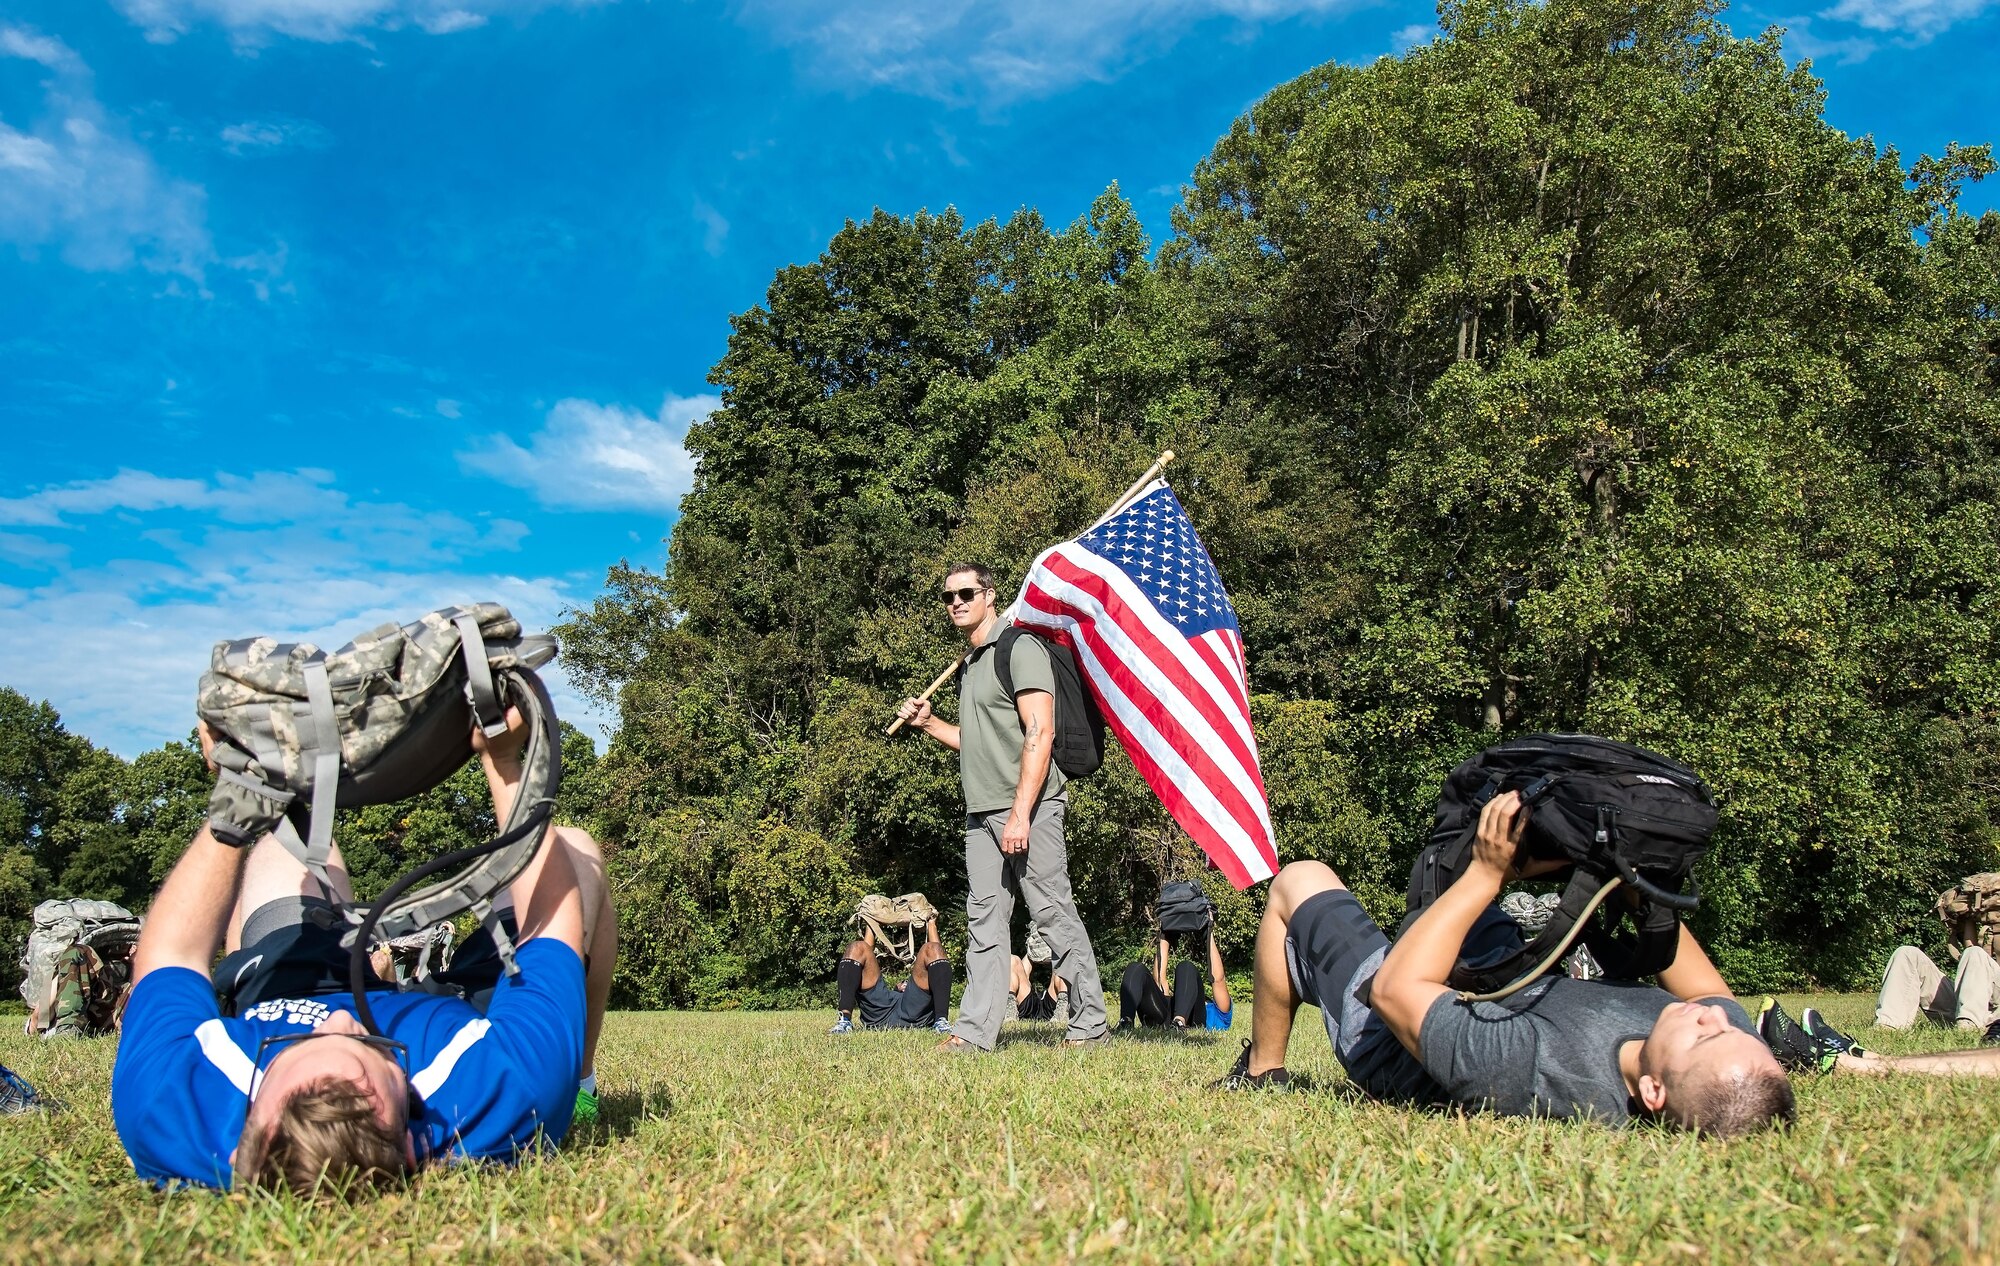 U.S. Army Master Sgt. Todd Fetzer, 1st Special Forces Command (Airborne), Ft. Bragg, N.C., watches GORUCK participants press their rucksack during warm-up exercises Oct. 6, 2017, at Brecknock Park in Camden, Del. Twenty-nine individuals completed the 2017 GORUCK Light Challenge. (U.S. Air Force photo by Roland Balik)